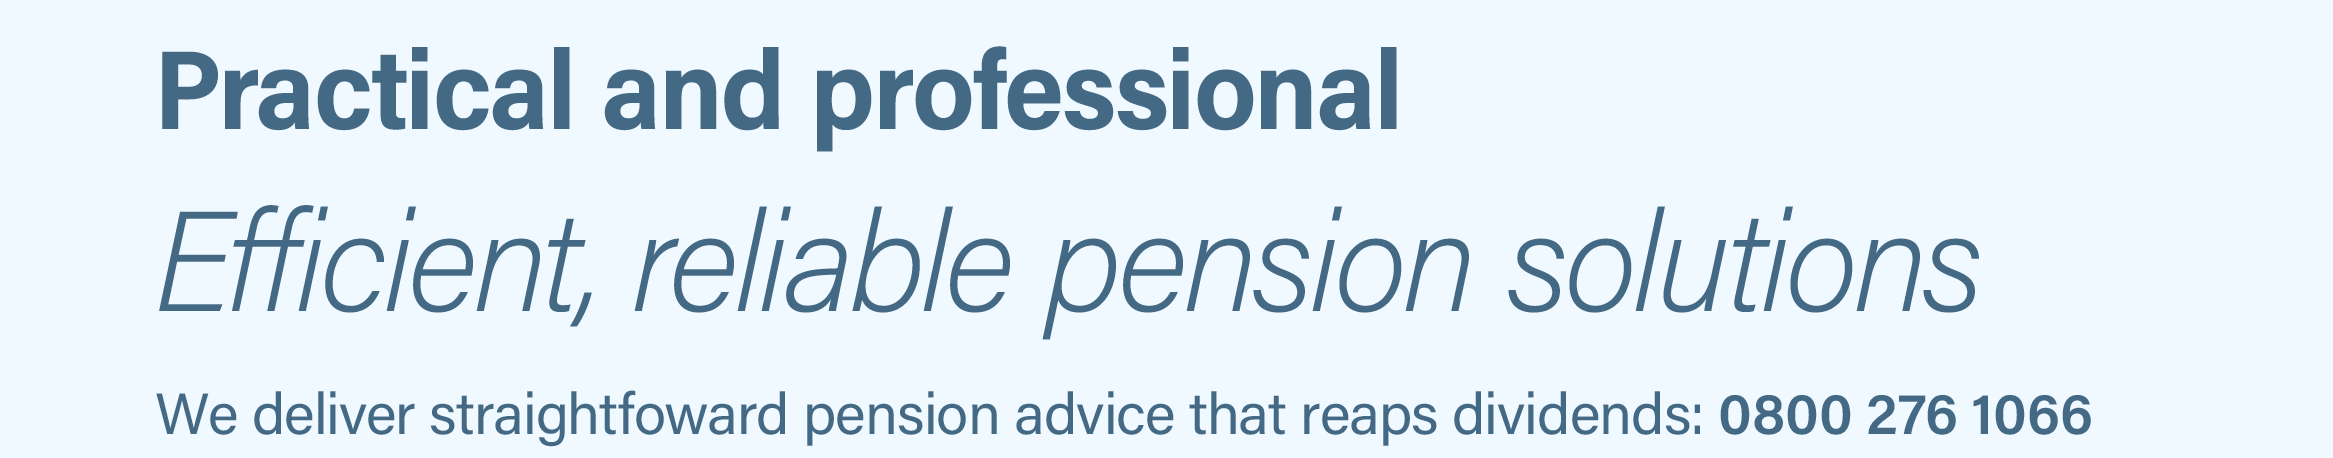 As advertised on Premier Christian Radio, GBNews Radio and Konnect Radio: Friendly, advice from professionals that care, is as easy as 1 - 2 - 3. Portfolios for income and capital growth, for private clients, trustees and churches. Pensions can be set up to deliver reliable income from dividend yield. Your source for independent financial advice you can trust: 0800 276 1066